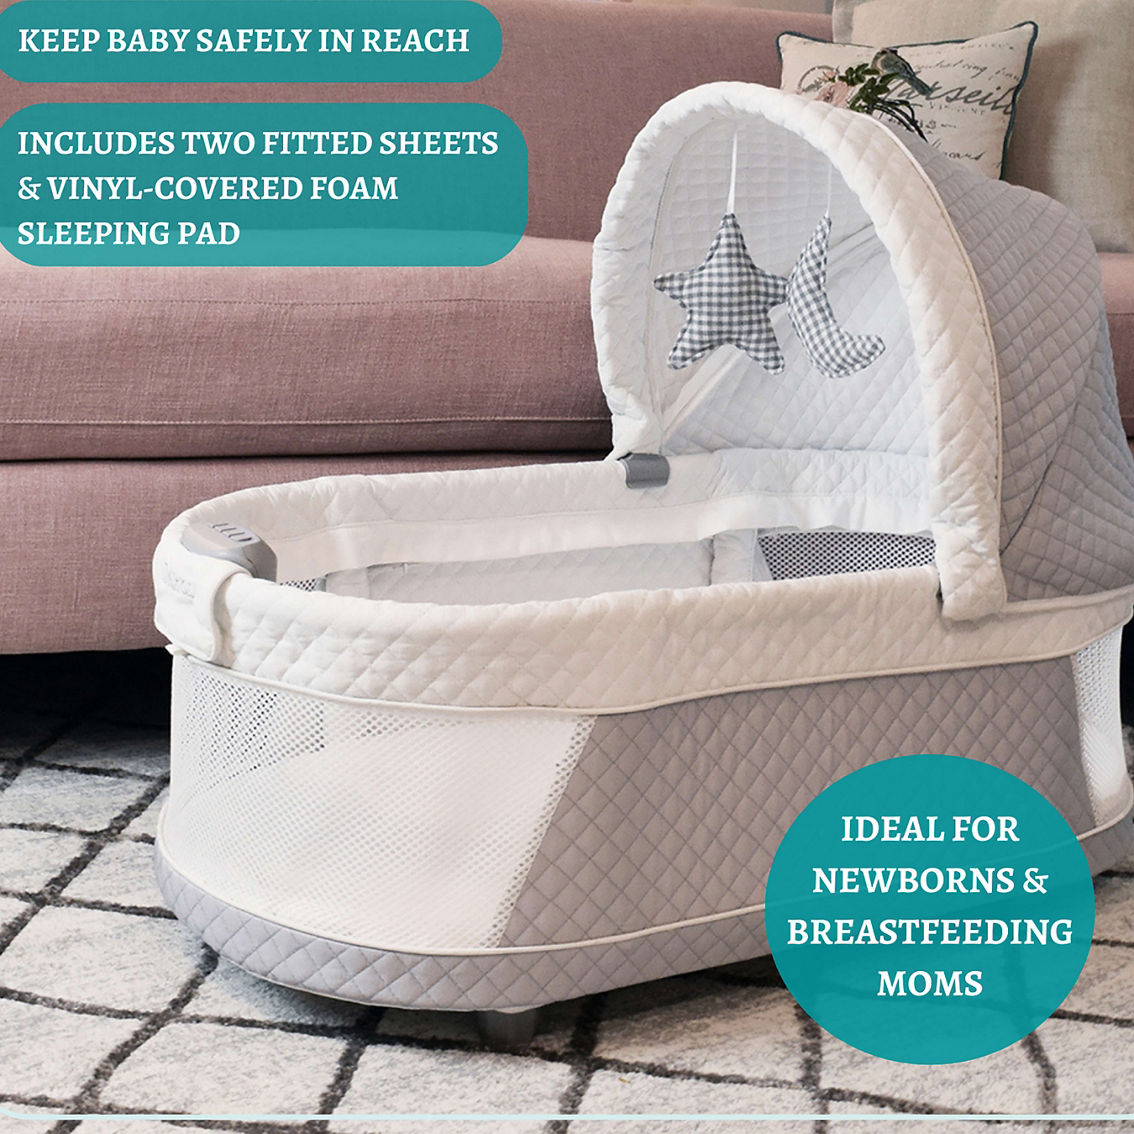 TruBliss Journey 2-in-1 Bassinet - Image 5 of 5